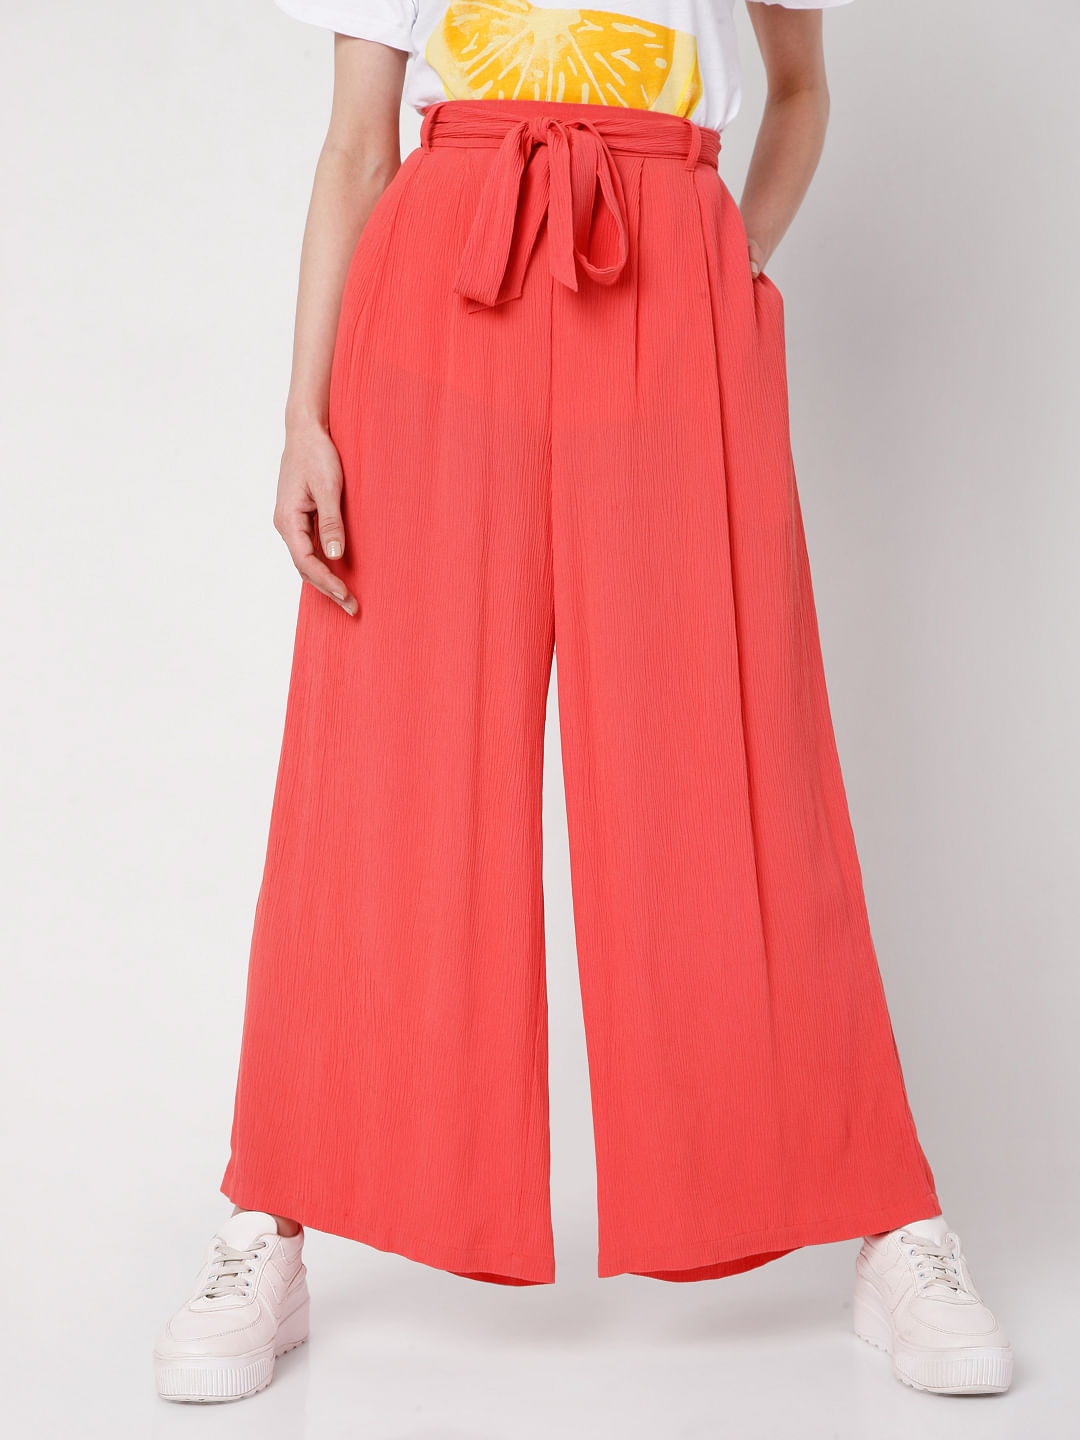 Buy Chic Basic Wide Leg Pants in Black  Rayon Online India Best Prices  COD  Clovia  LB0192P13